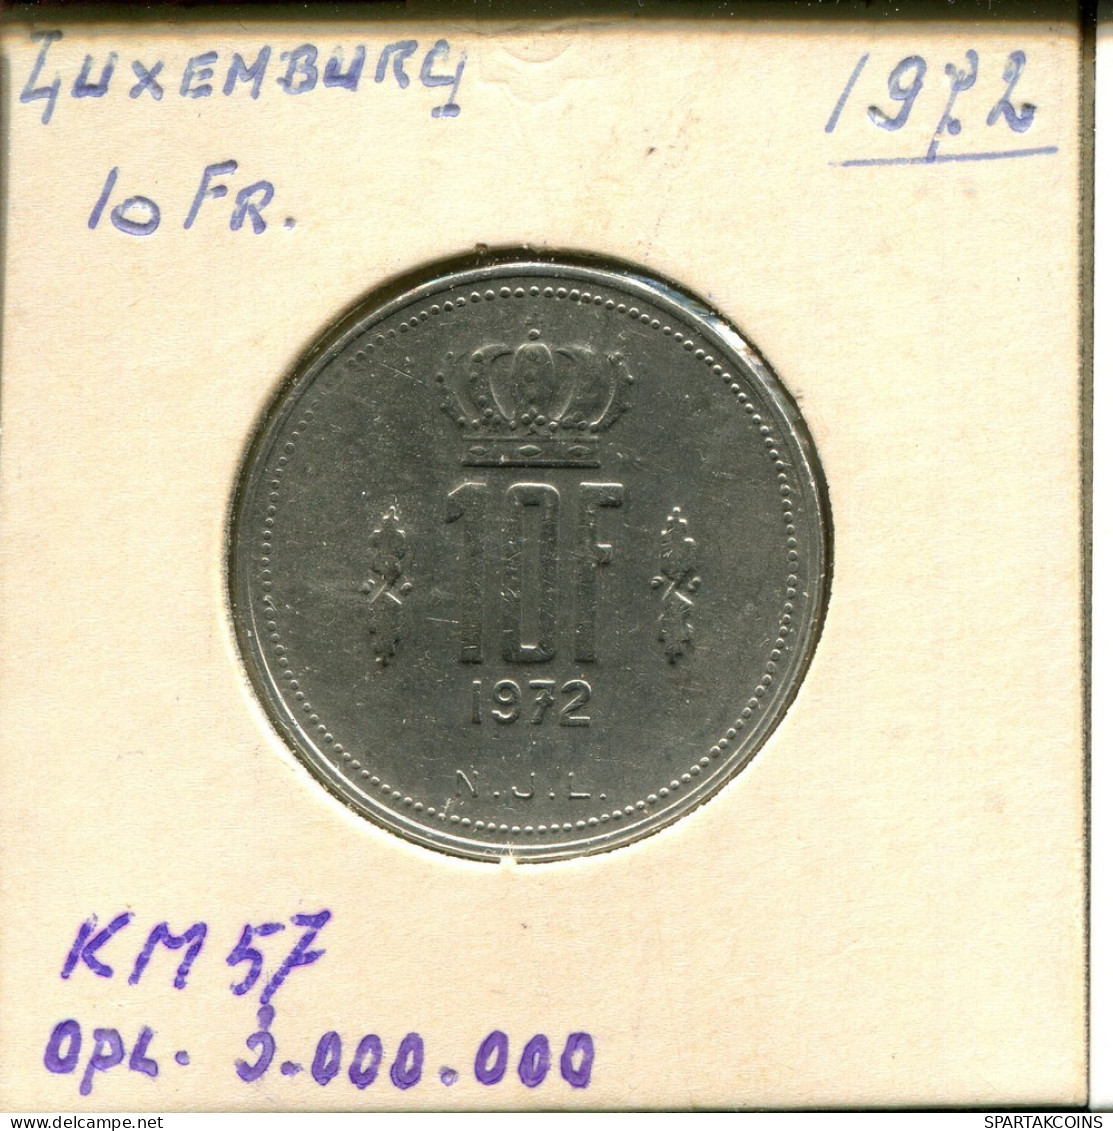 10 FRANCS 1972 LUXEMBURG LUXEMBOURG Münze #AT239.D.A - Luxemburg